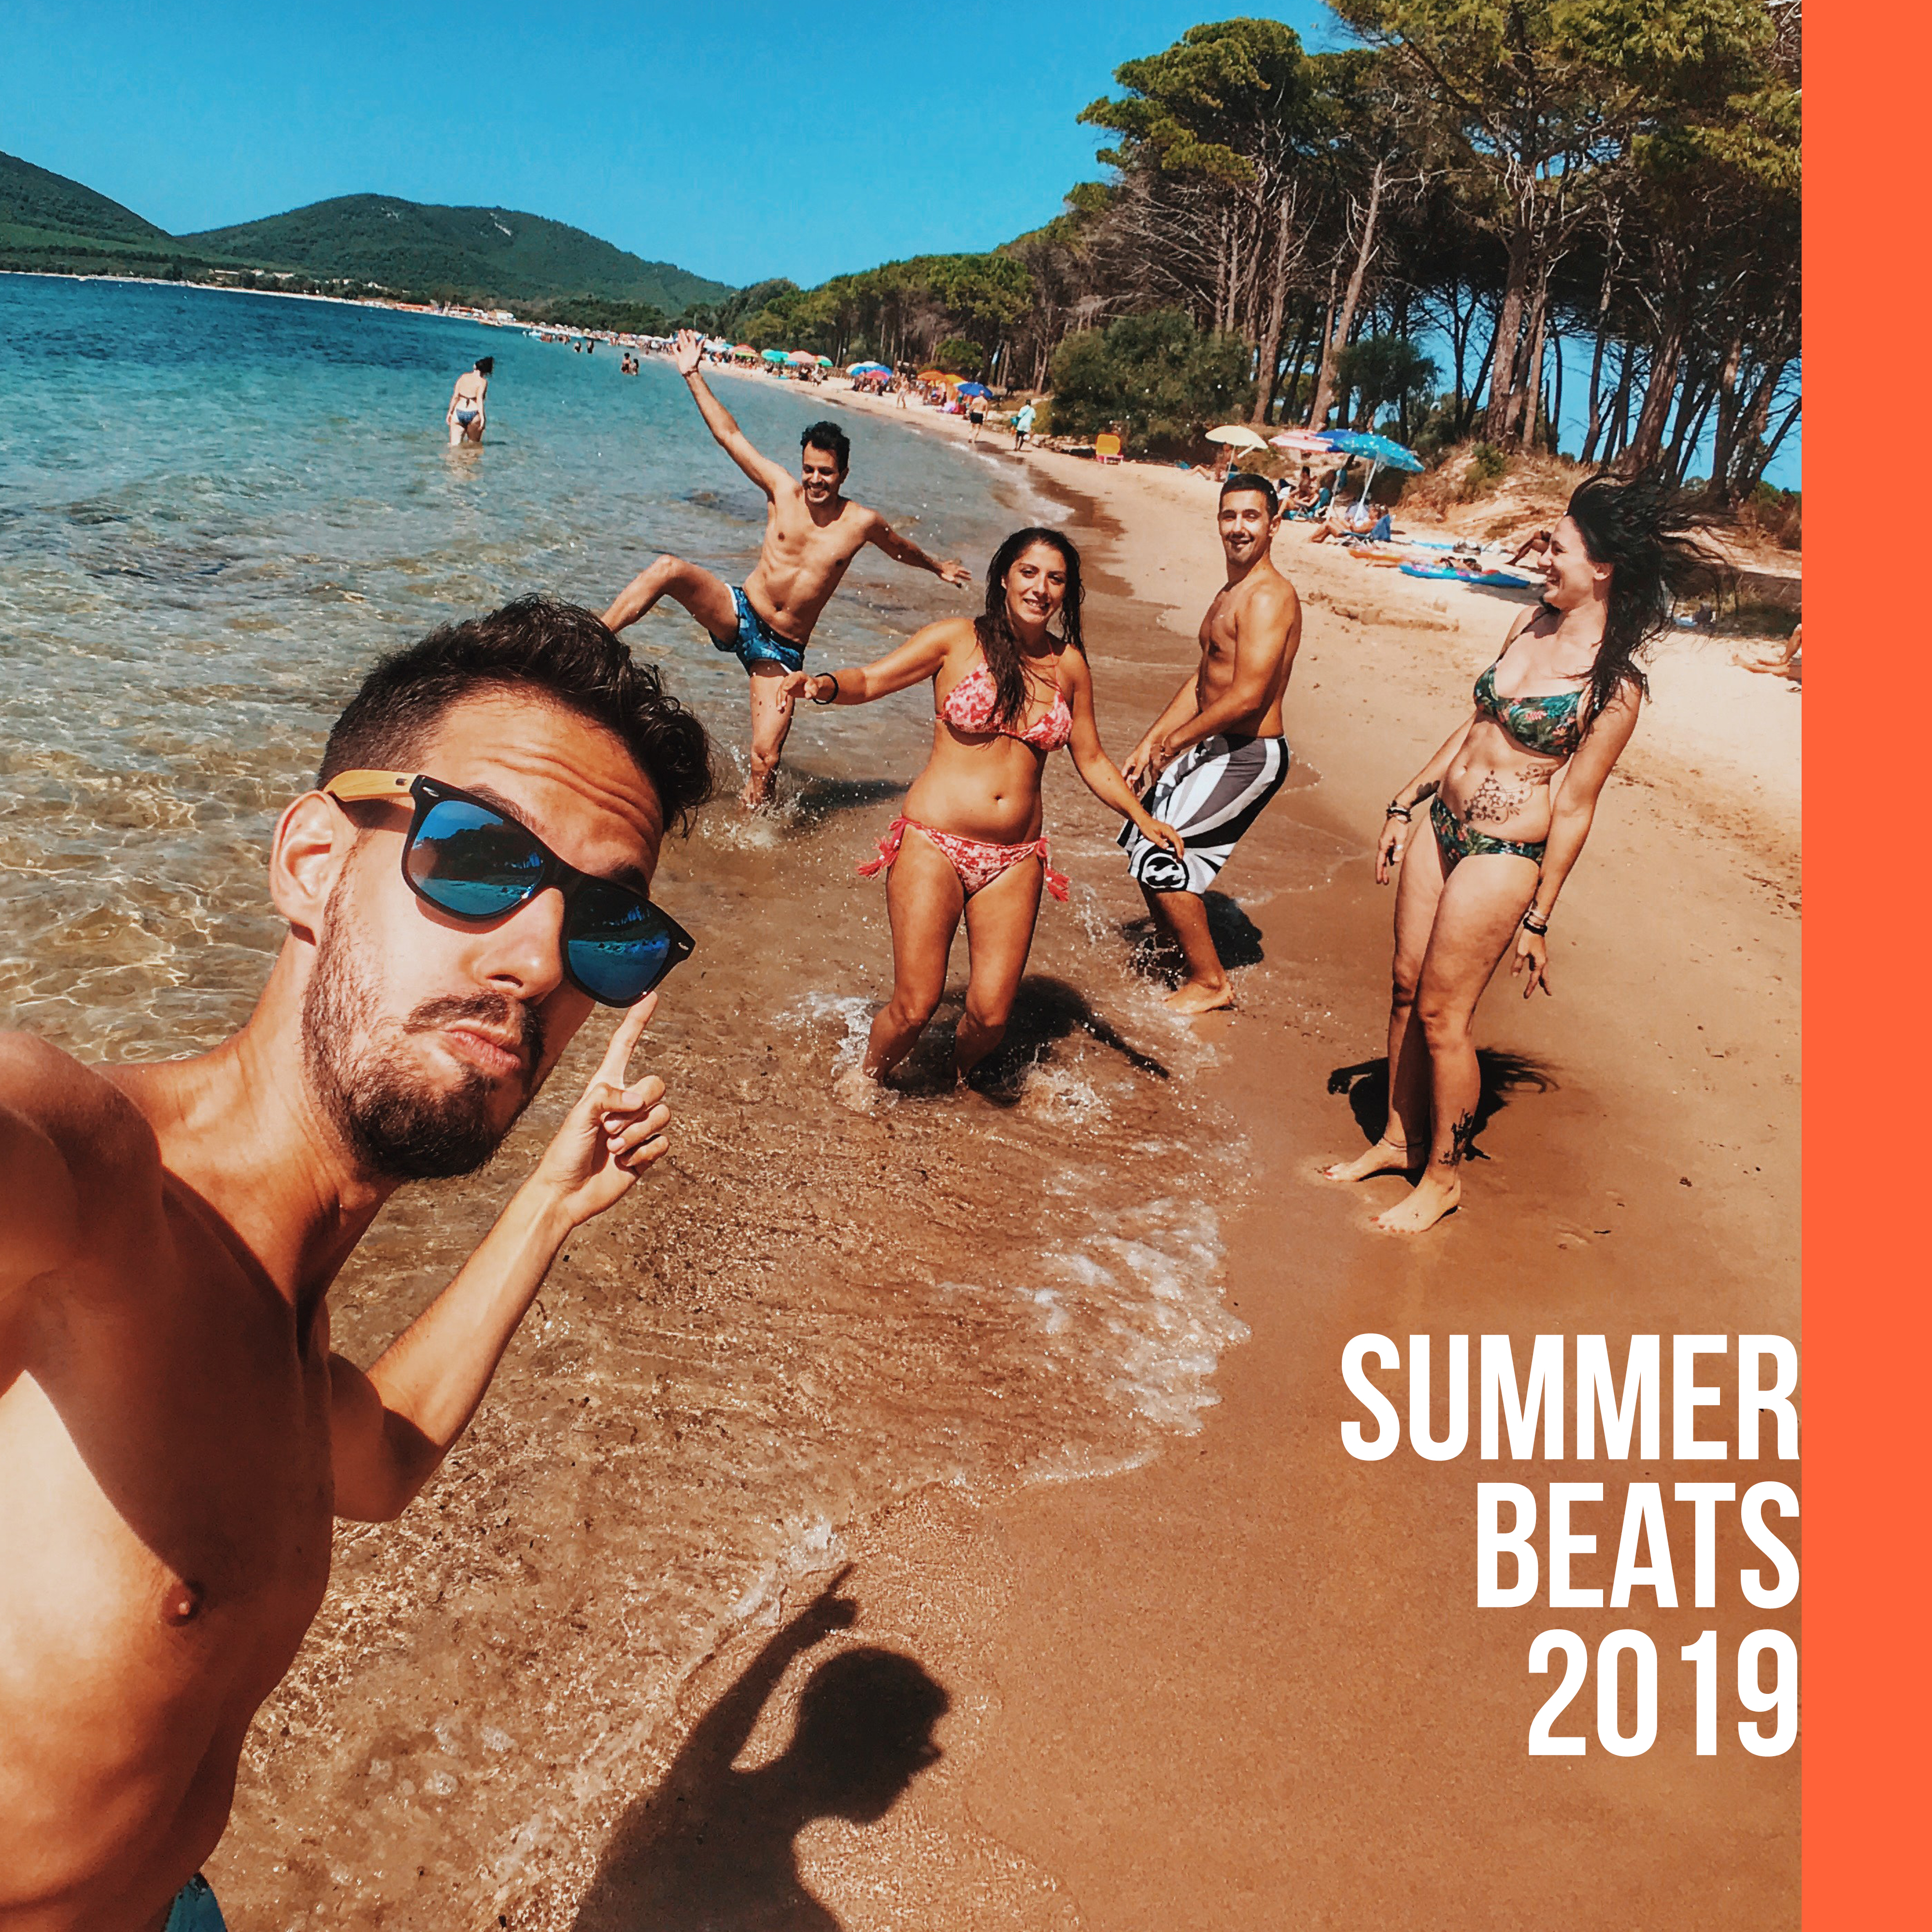 Summer Beats 2019 – Relaxing Vibes, Chill Out 2019, Ibiza Chill Out, Summer Hits, Relaxing Exotic Beats, Calm Down